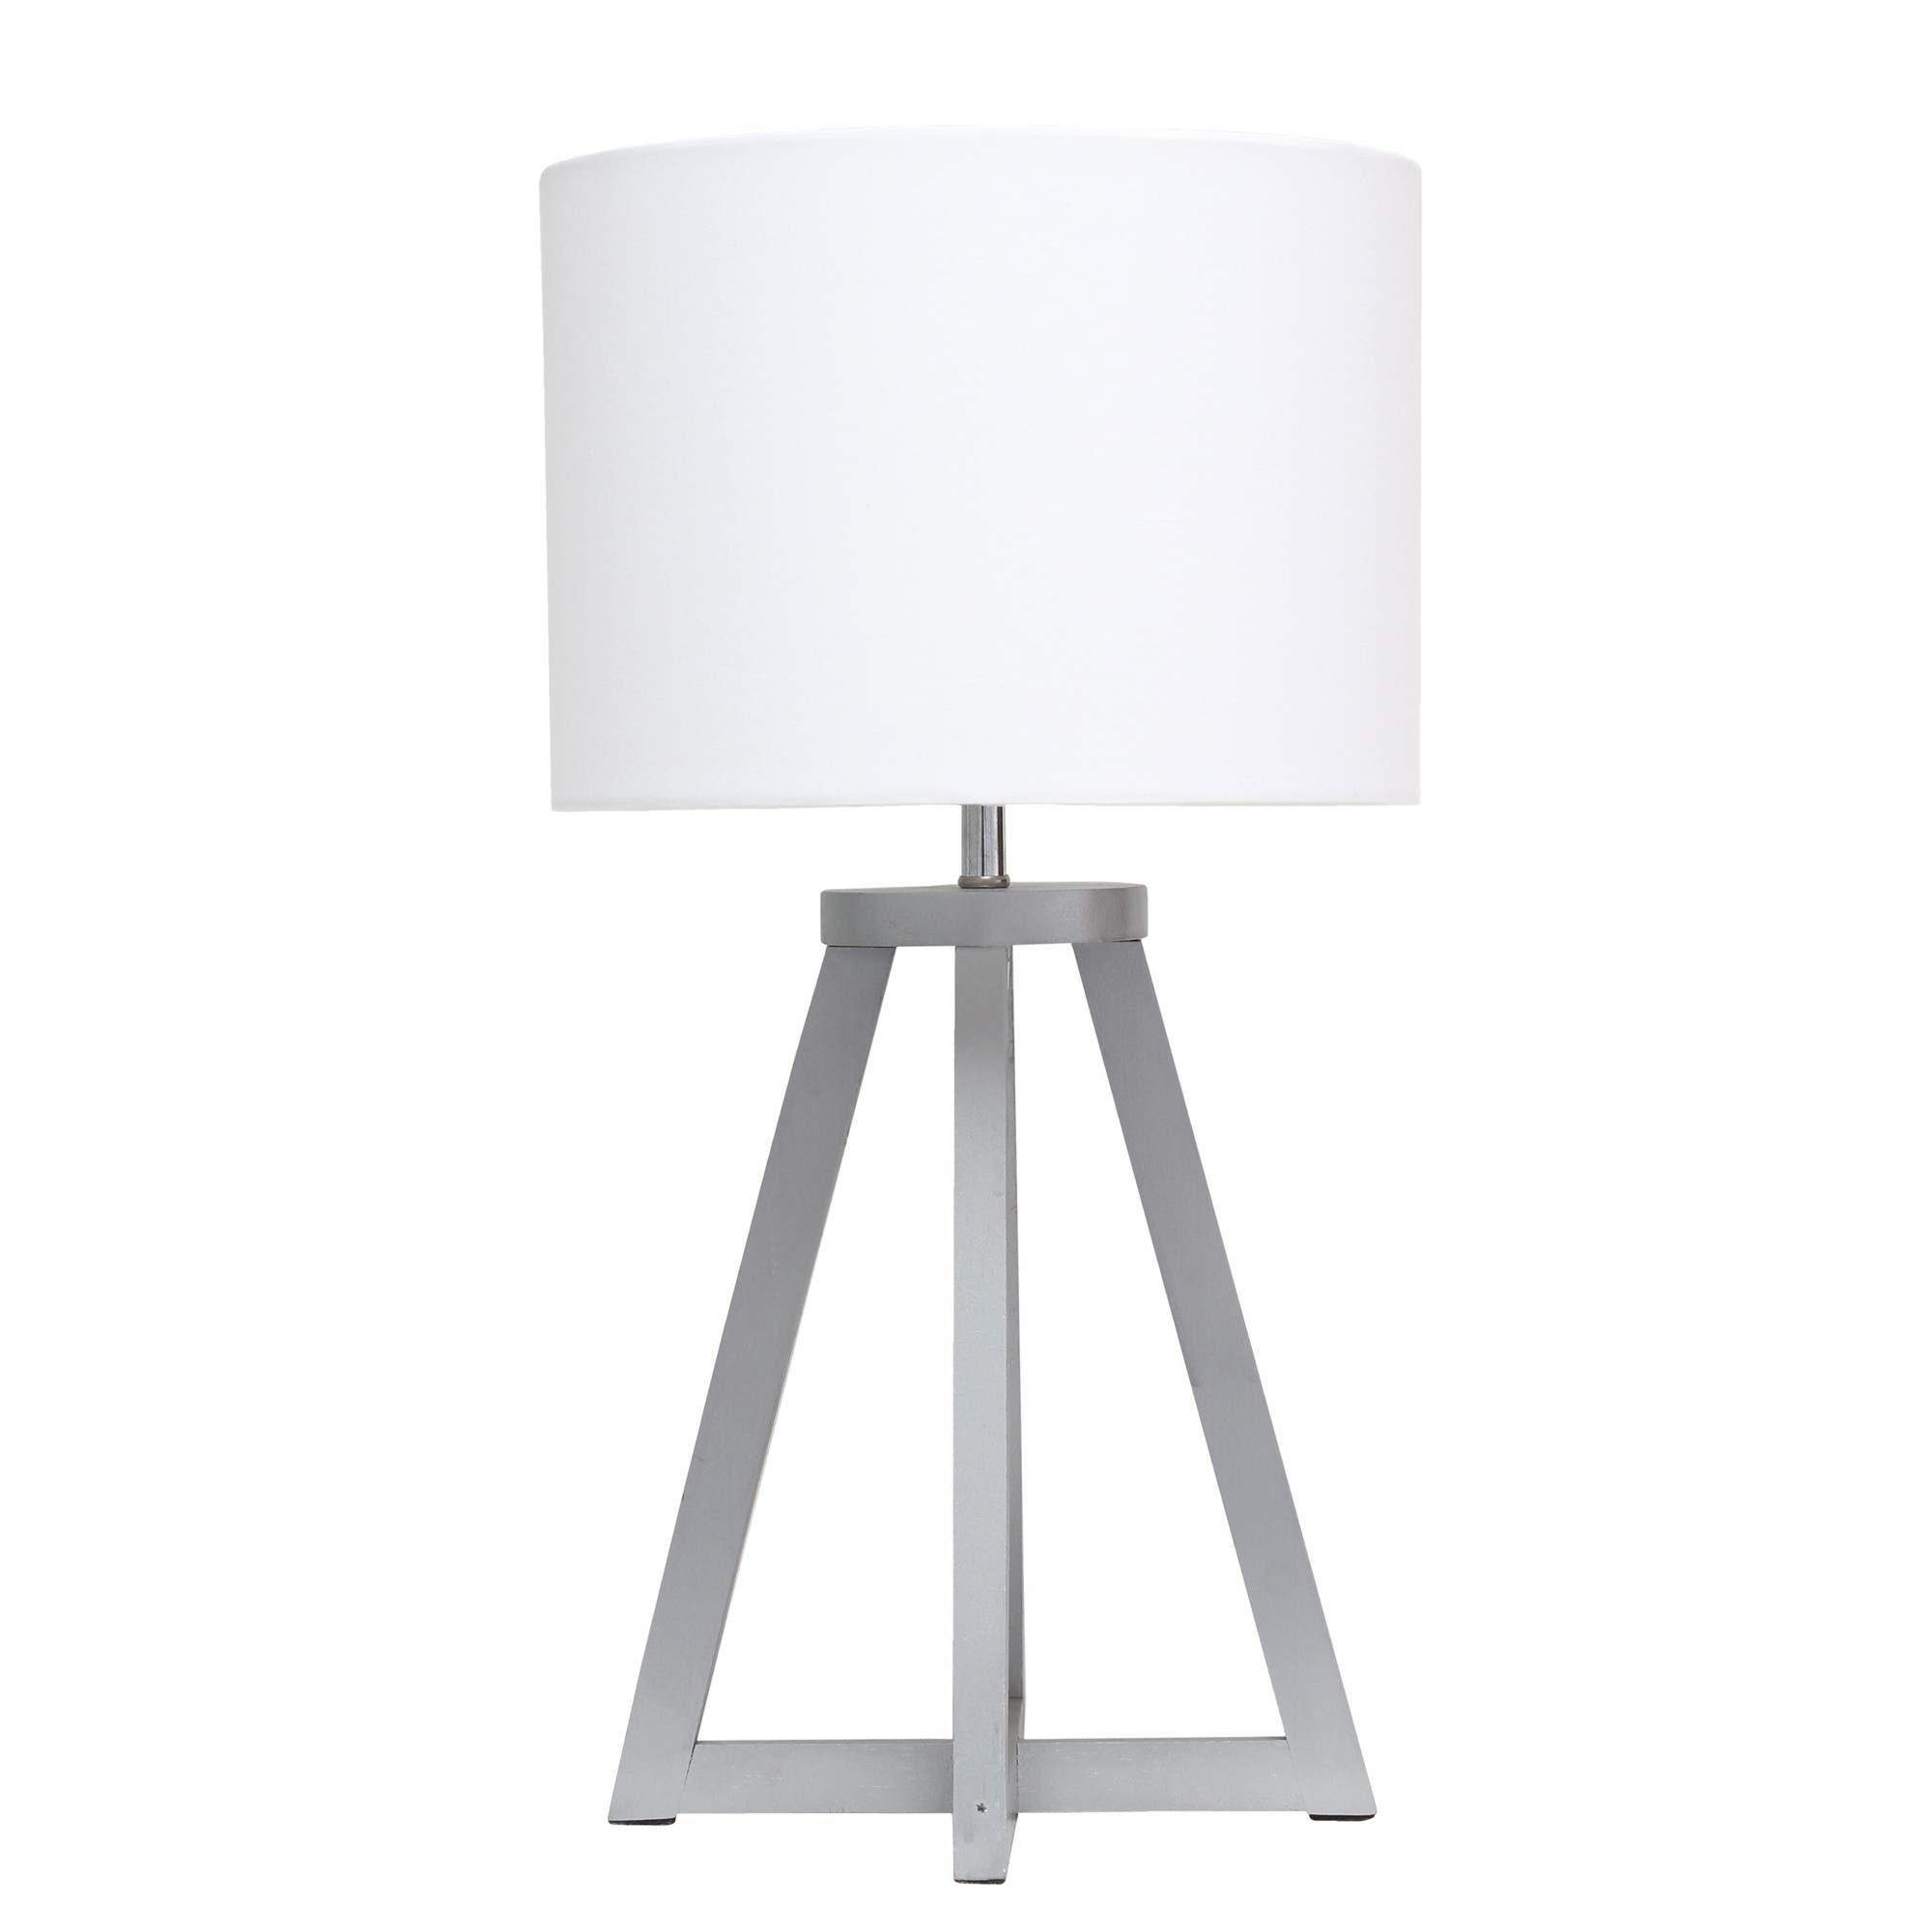 Simple Designs Interlocked Triangular Gray Wood Table Lamp with White Fabric Shade